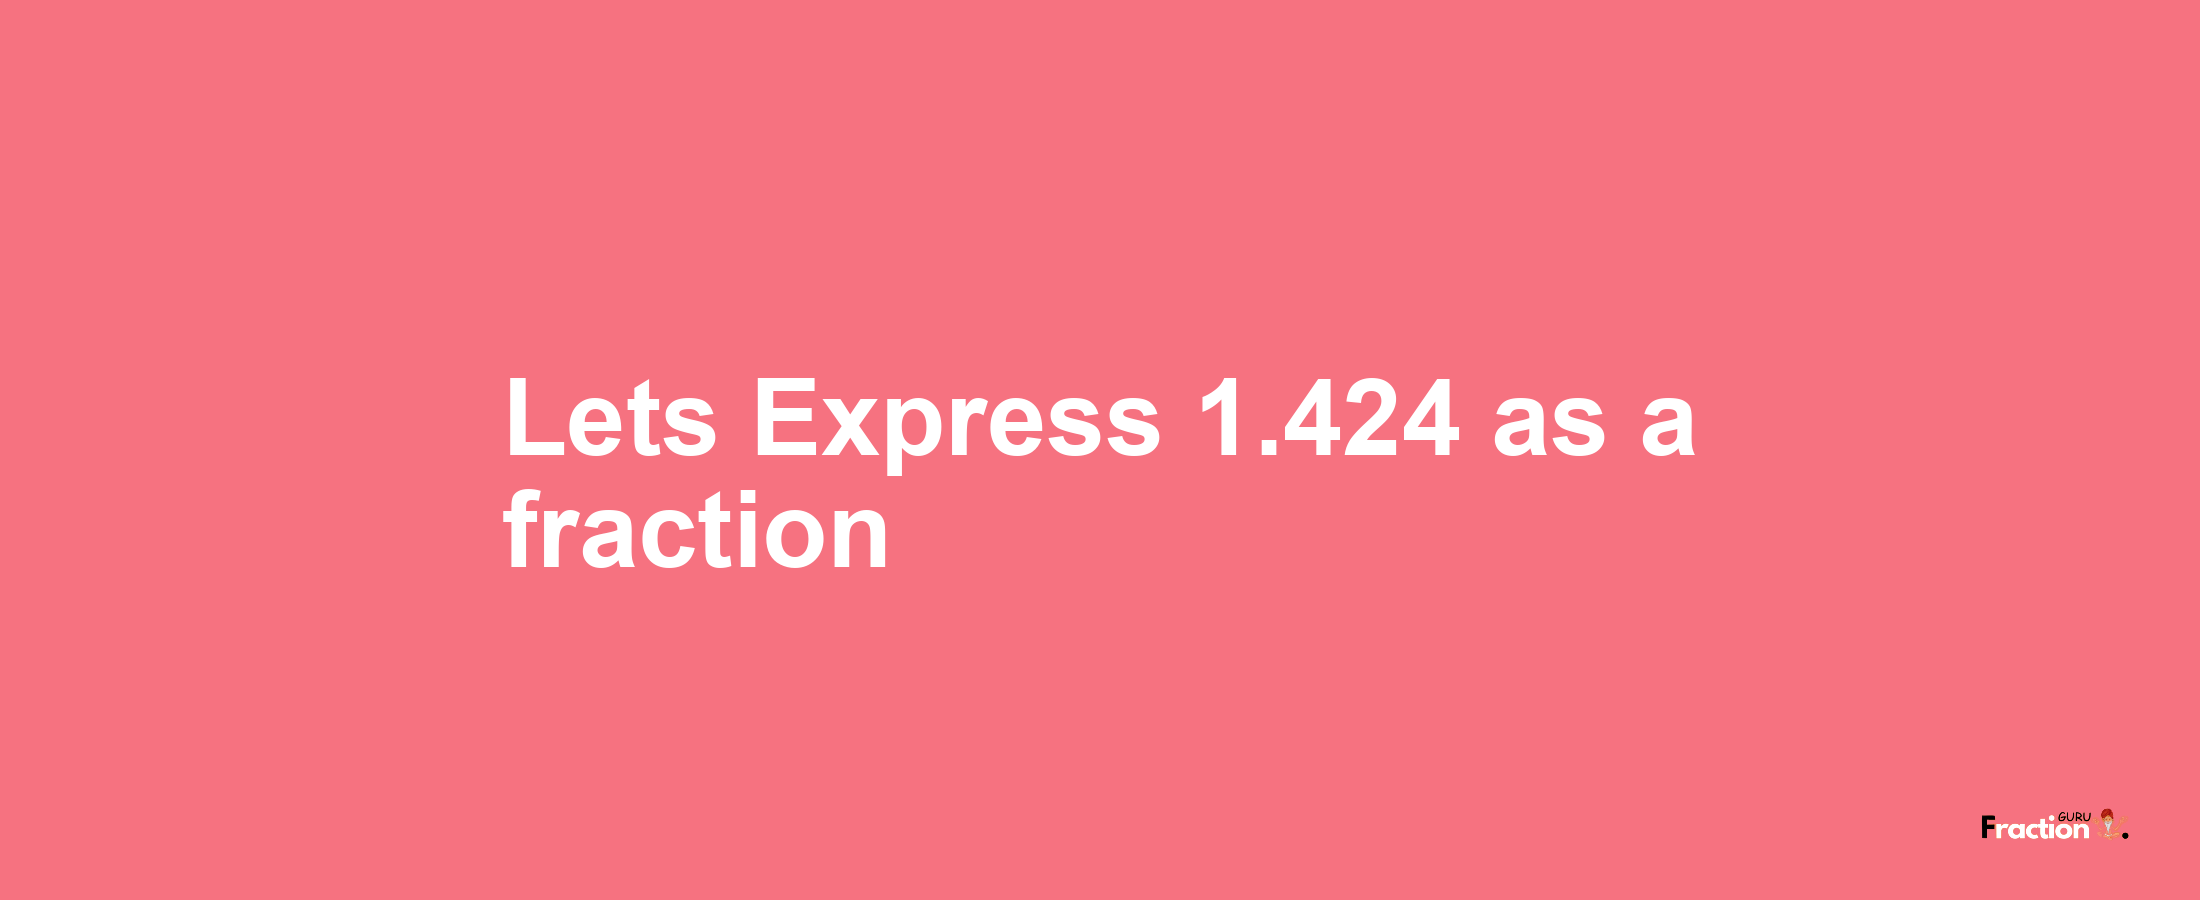 Lets Express 1.424 as afraction